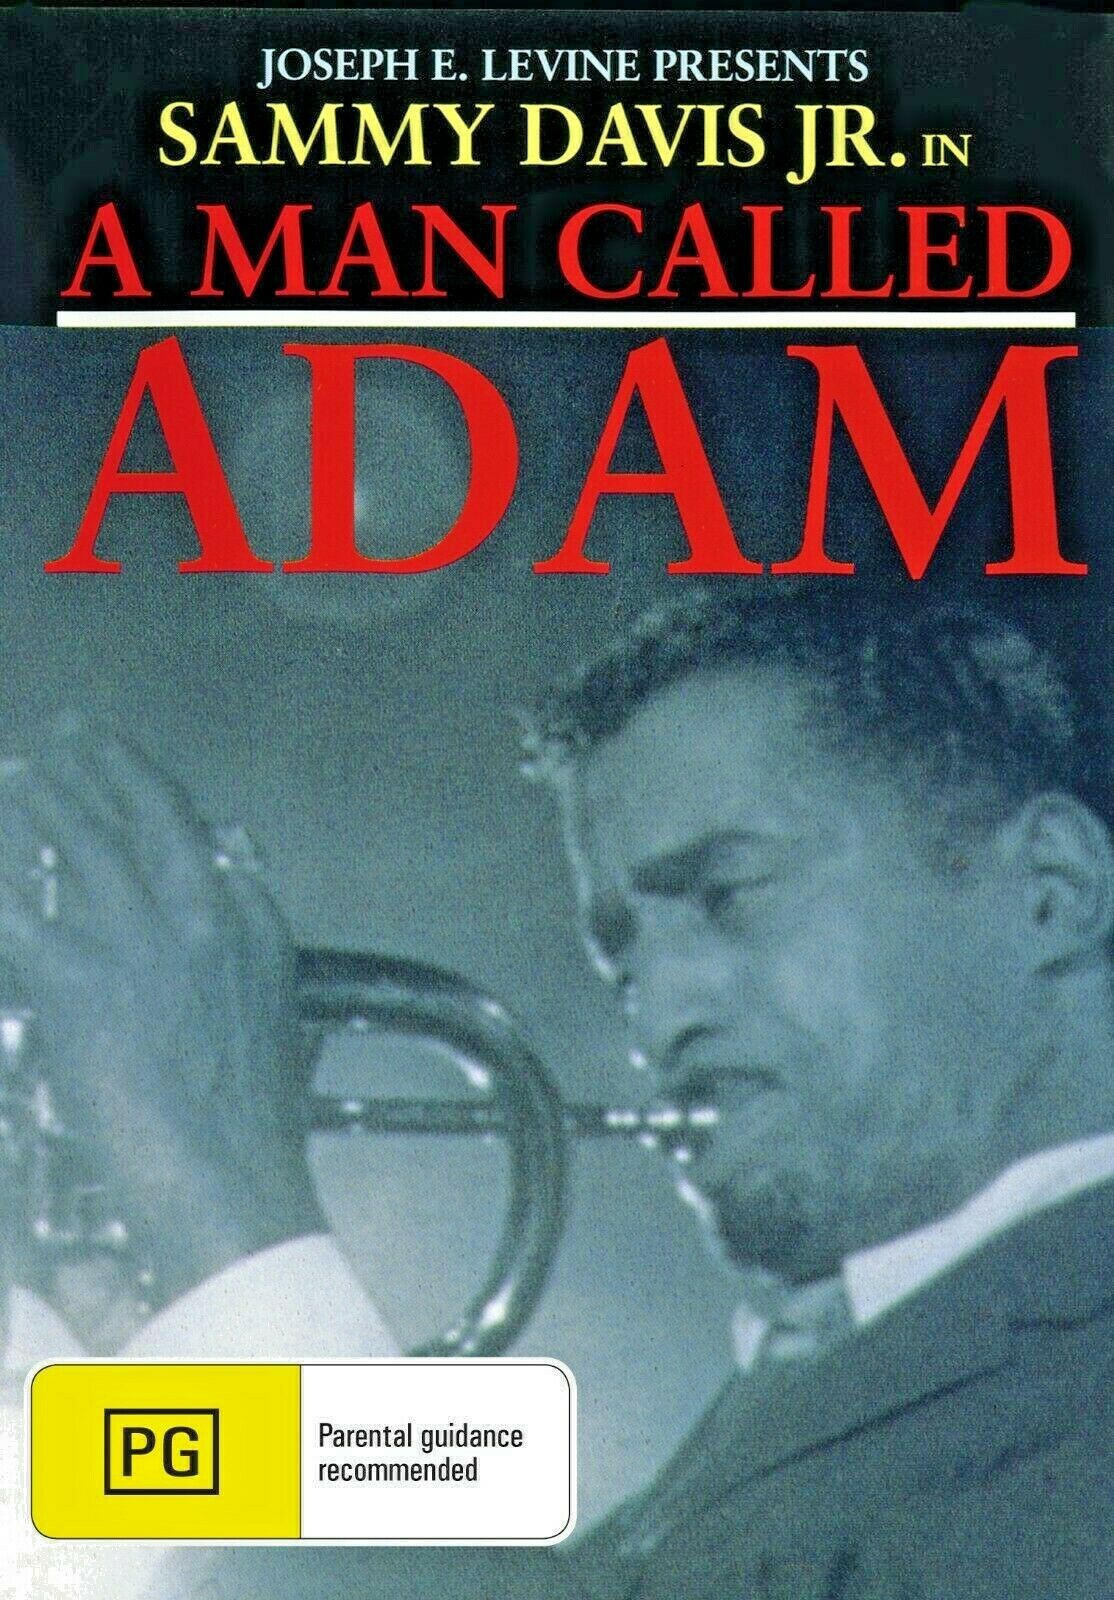 Buy Online A Man Called Adam (1966) - DVD -NEW - Sammy Davis Jr., Louis Armstrong | Best Shop for Old classic and hard to find movies on DVD - Timeless Classic DVD